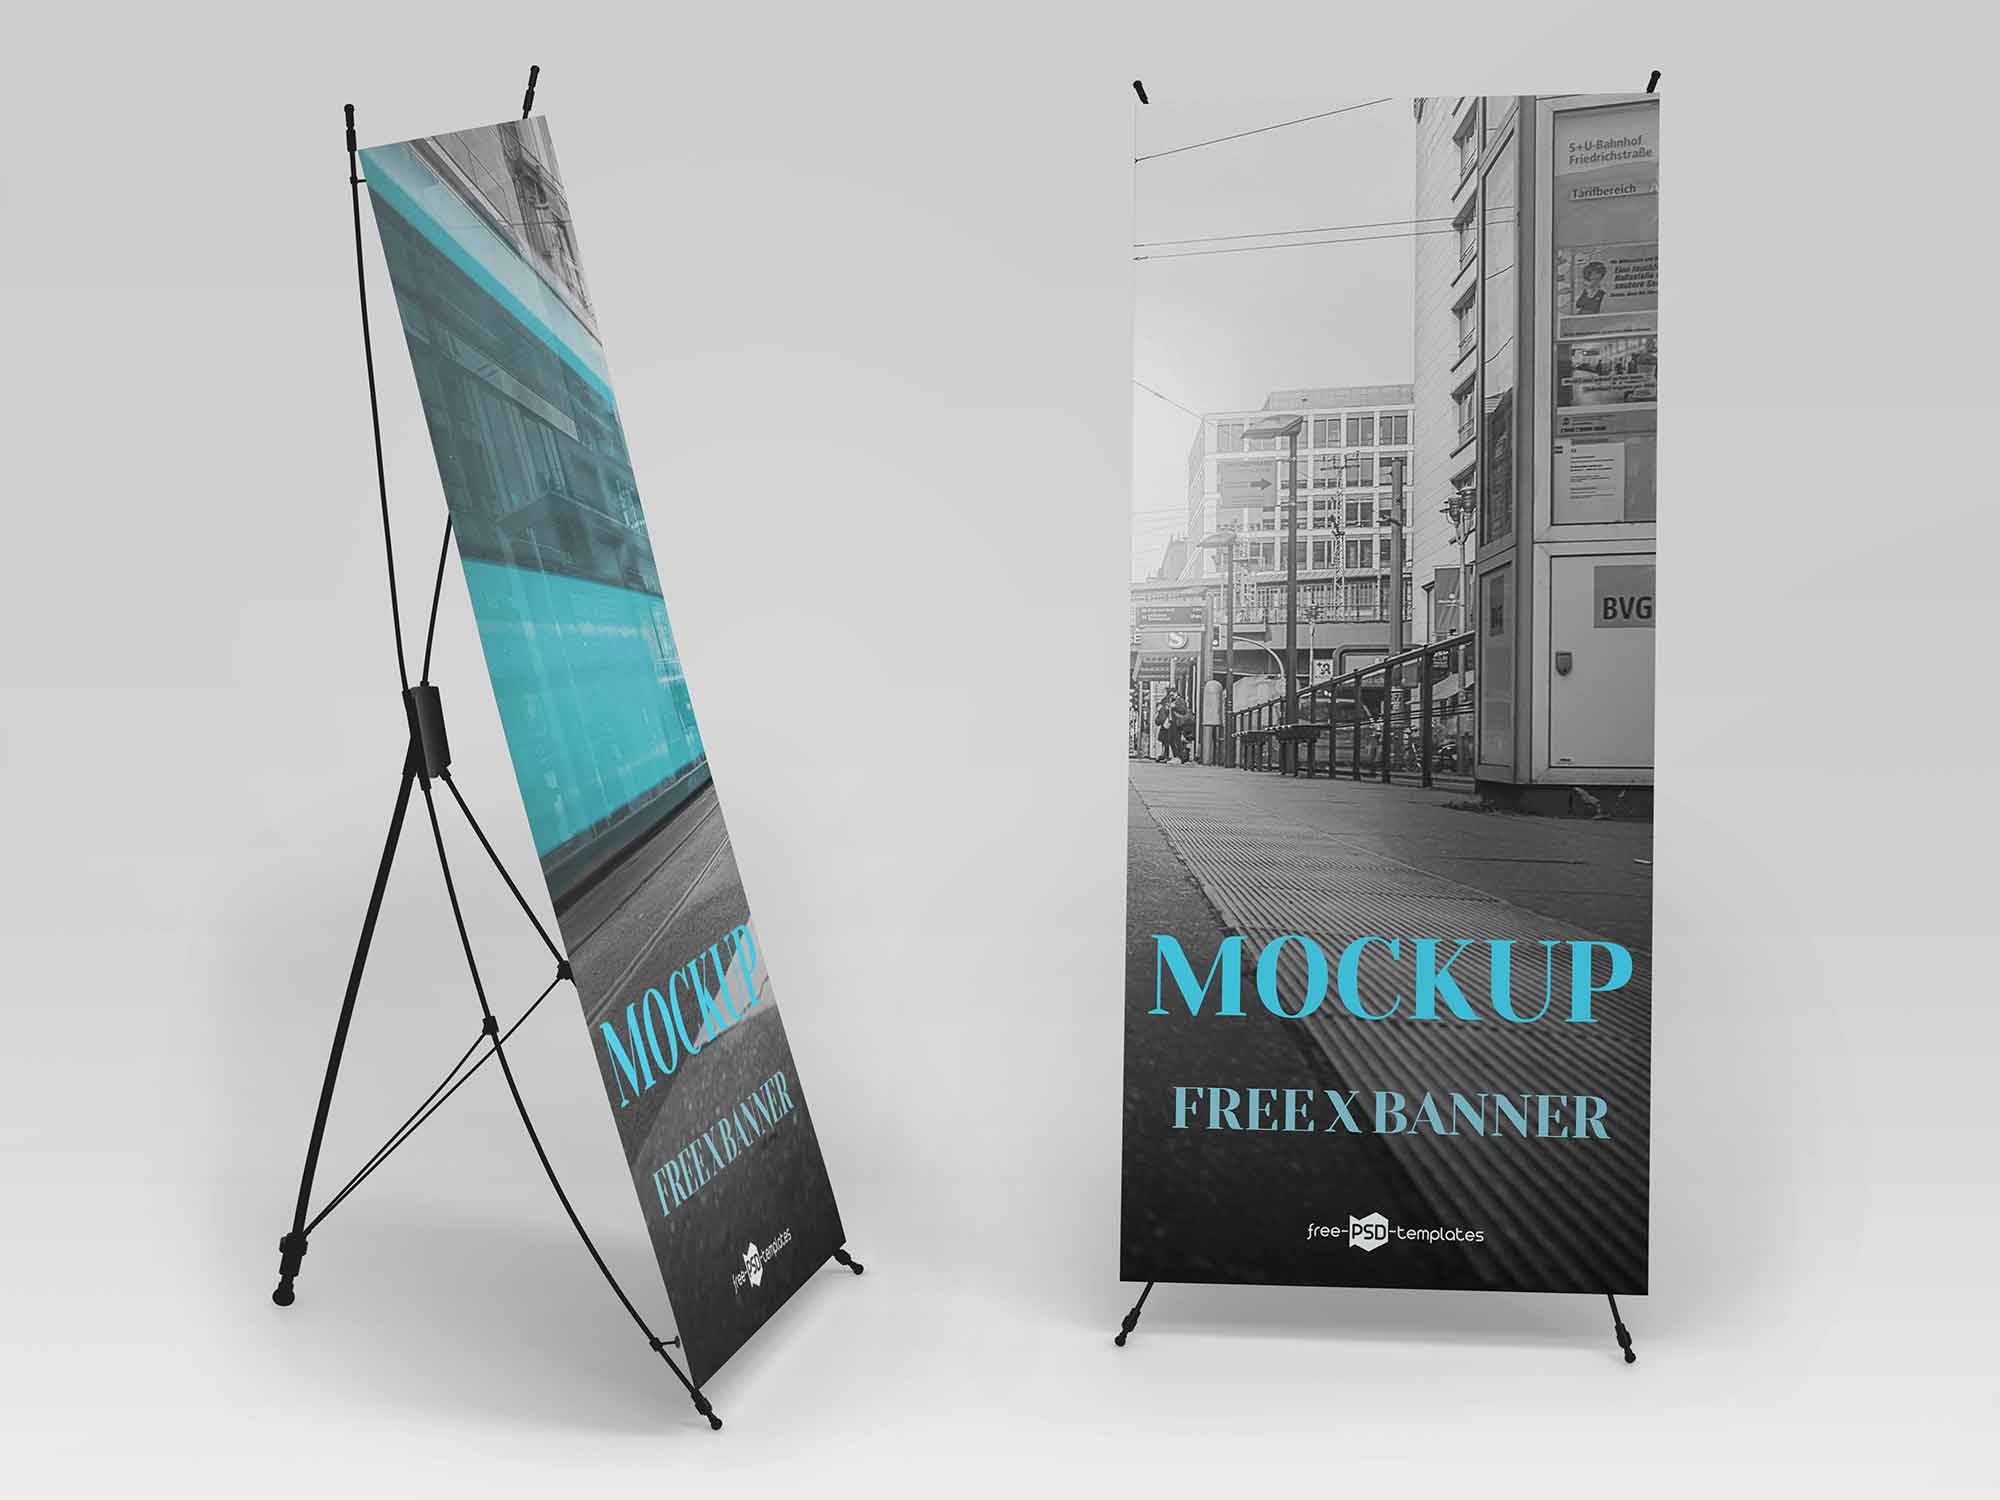 x-banner-display-stand